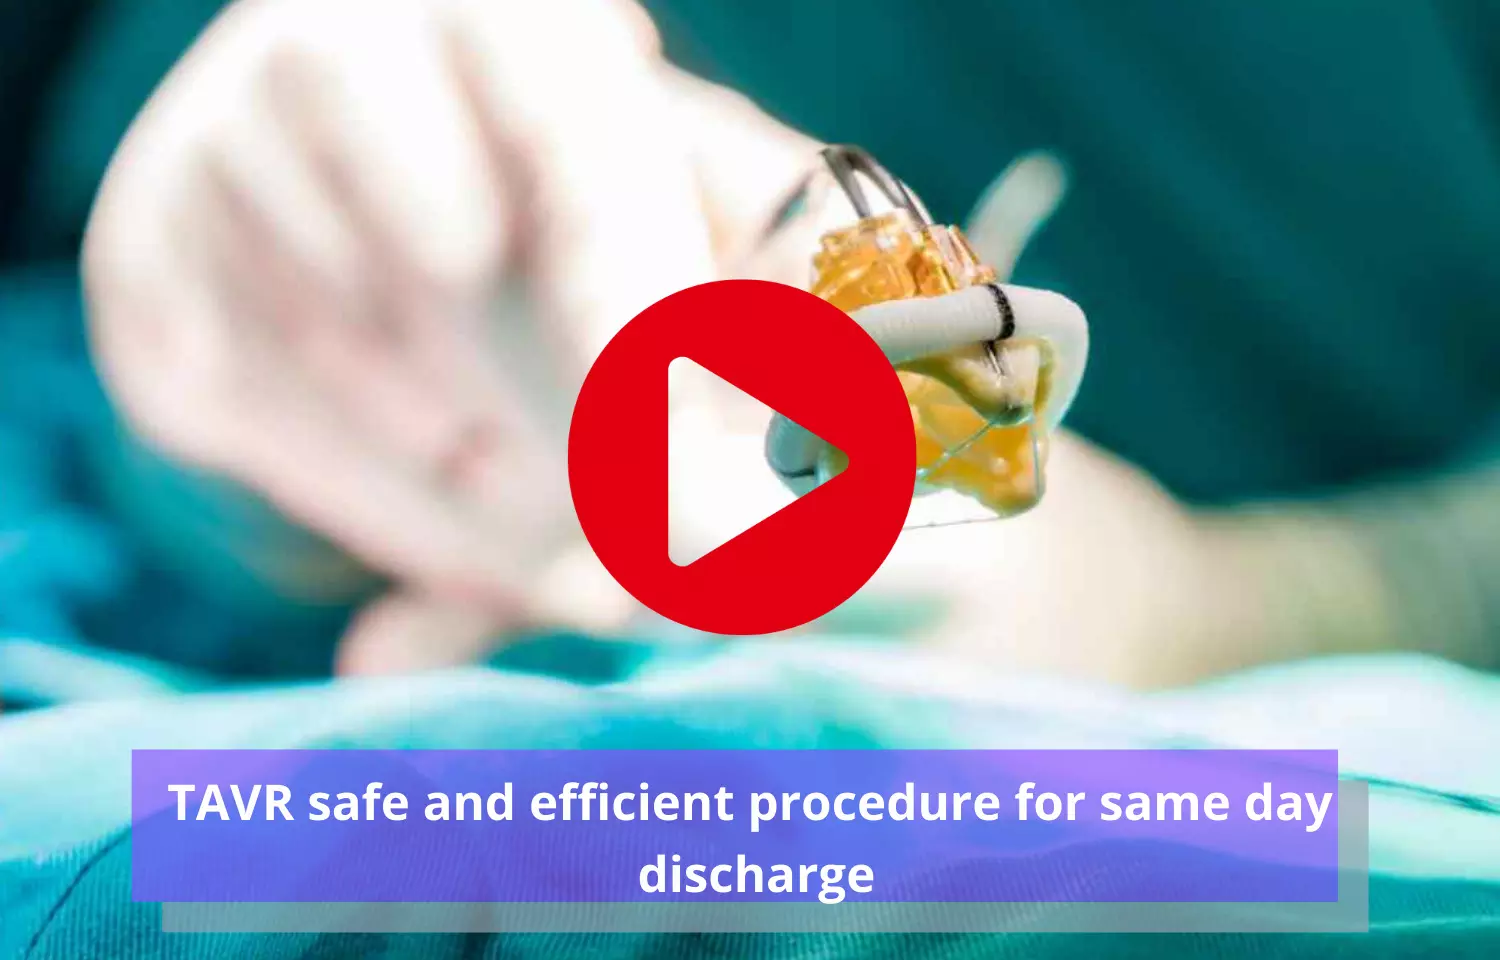 TAVR safe and efficient procedure for same day discharge